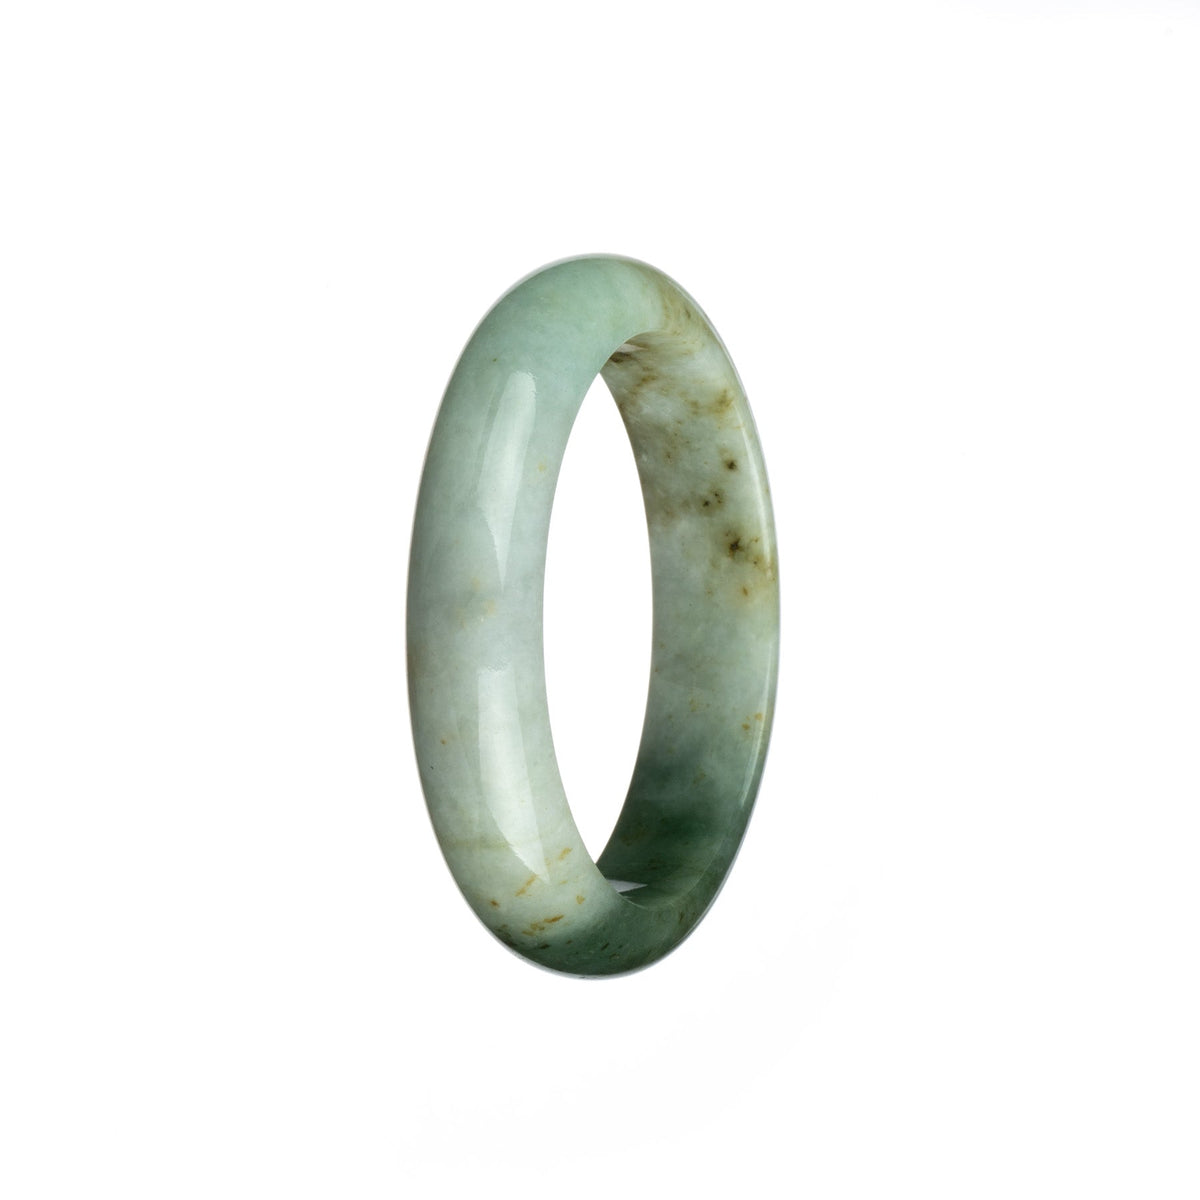 A beautiful half moon shaped jade bracelet with a mix of white and green colors, made from genuine Type A White and Green Burma Jade. Perfect for adding a touch of elegance to any outfit.